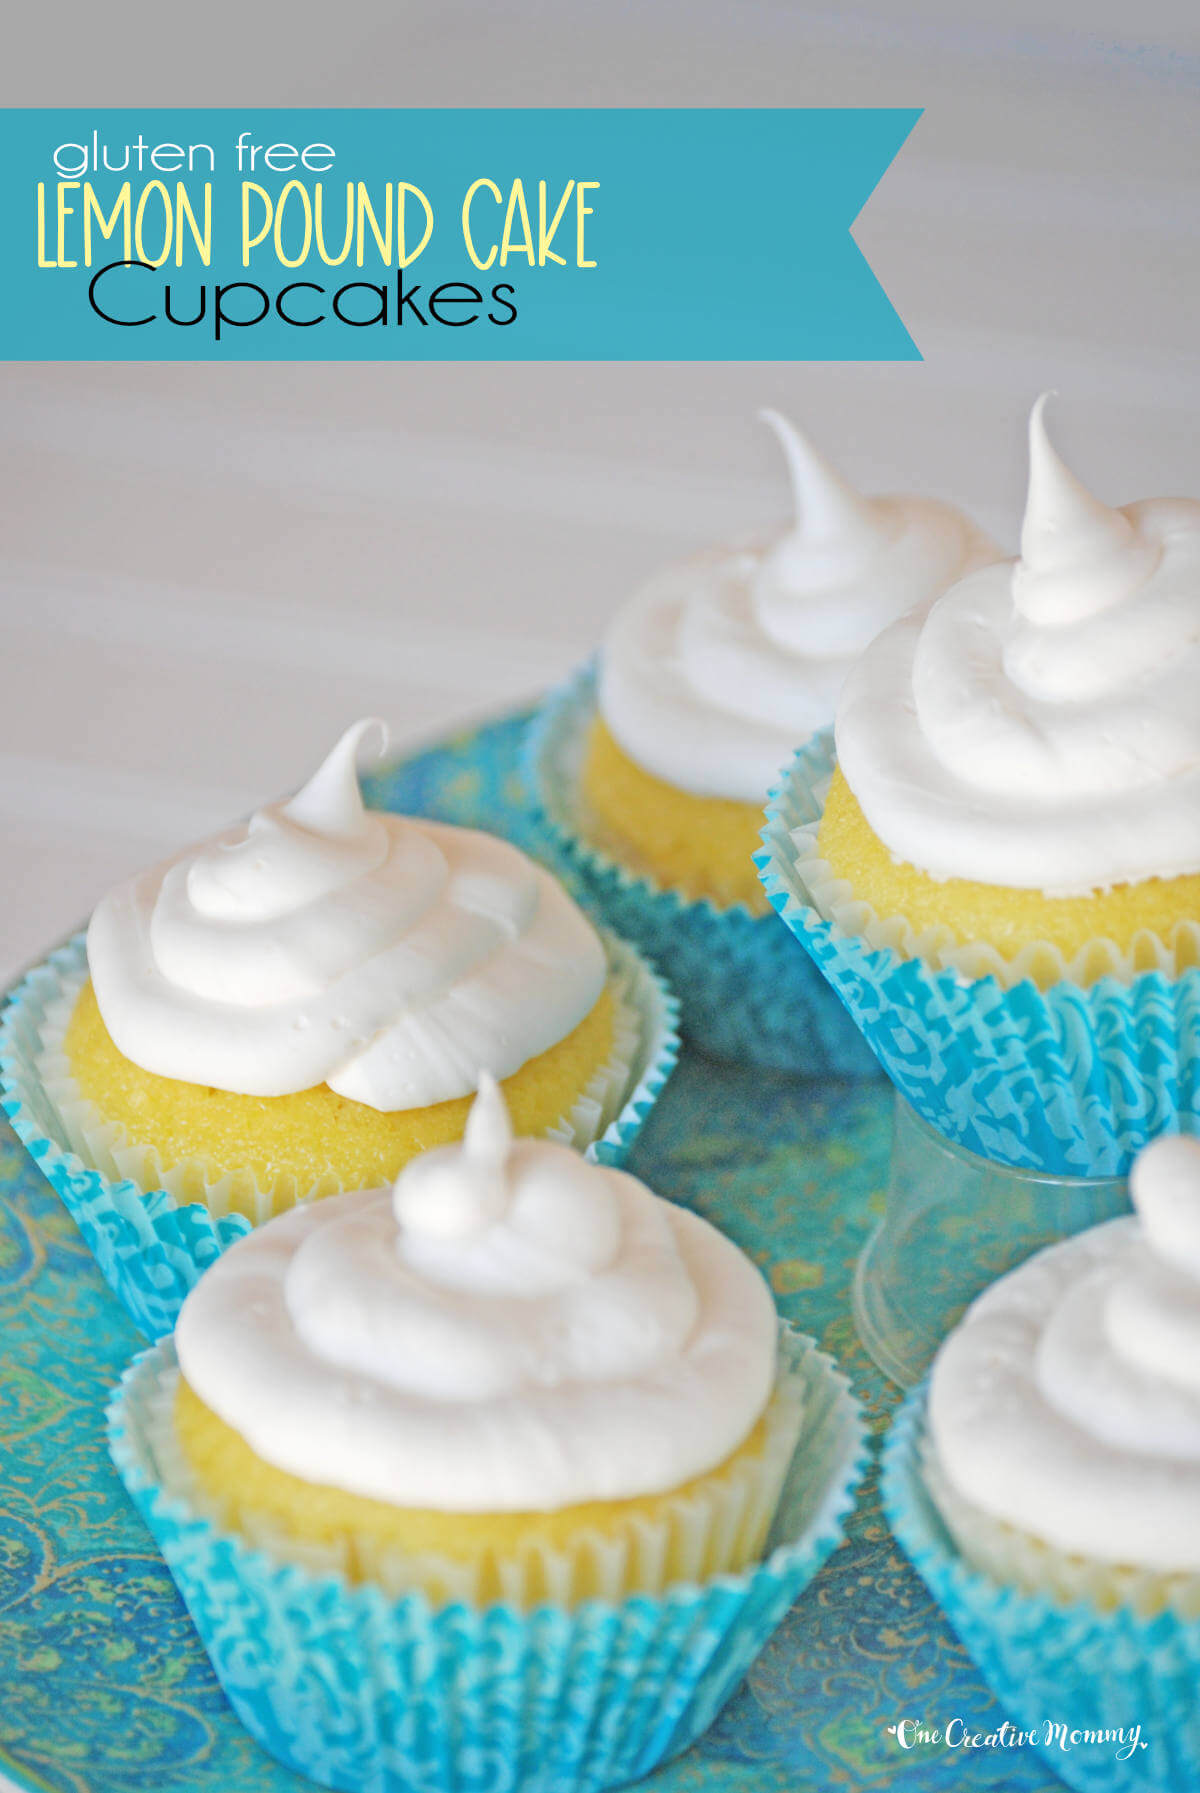 Several delicious gluten free lemon pound cake cupcakes arranged on a pretty plate. They are bright yellow, frosted with white frosting, and nestled inside blue cupcake liners.